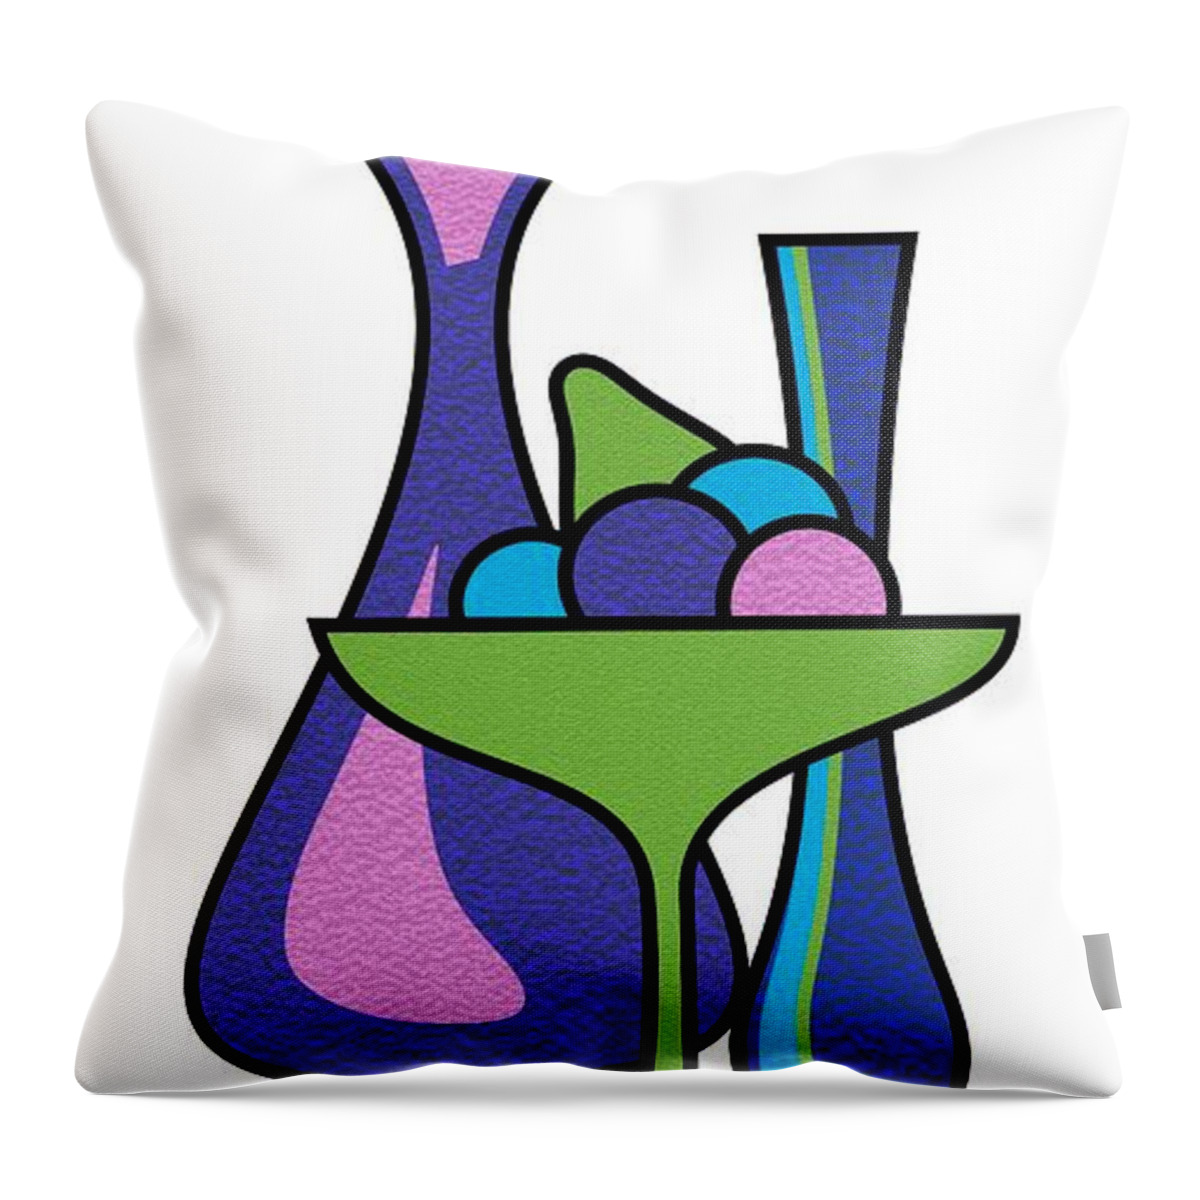 Gravel Art Throw Pillow featuring the digital art Gravel Art Fruit Compote by Donna Mibus